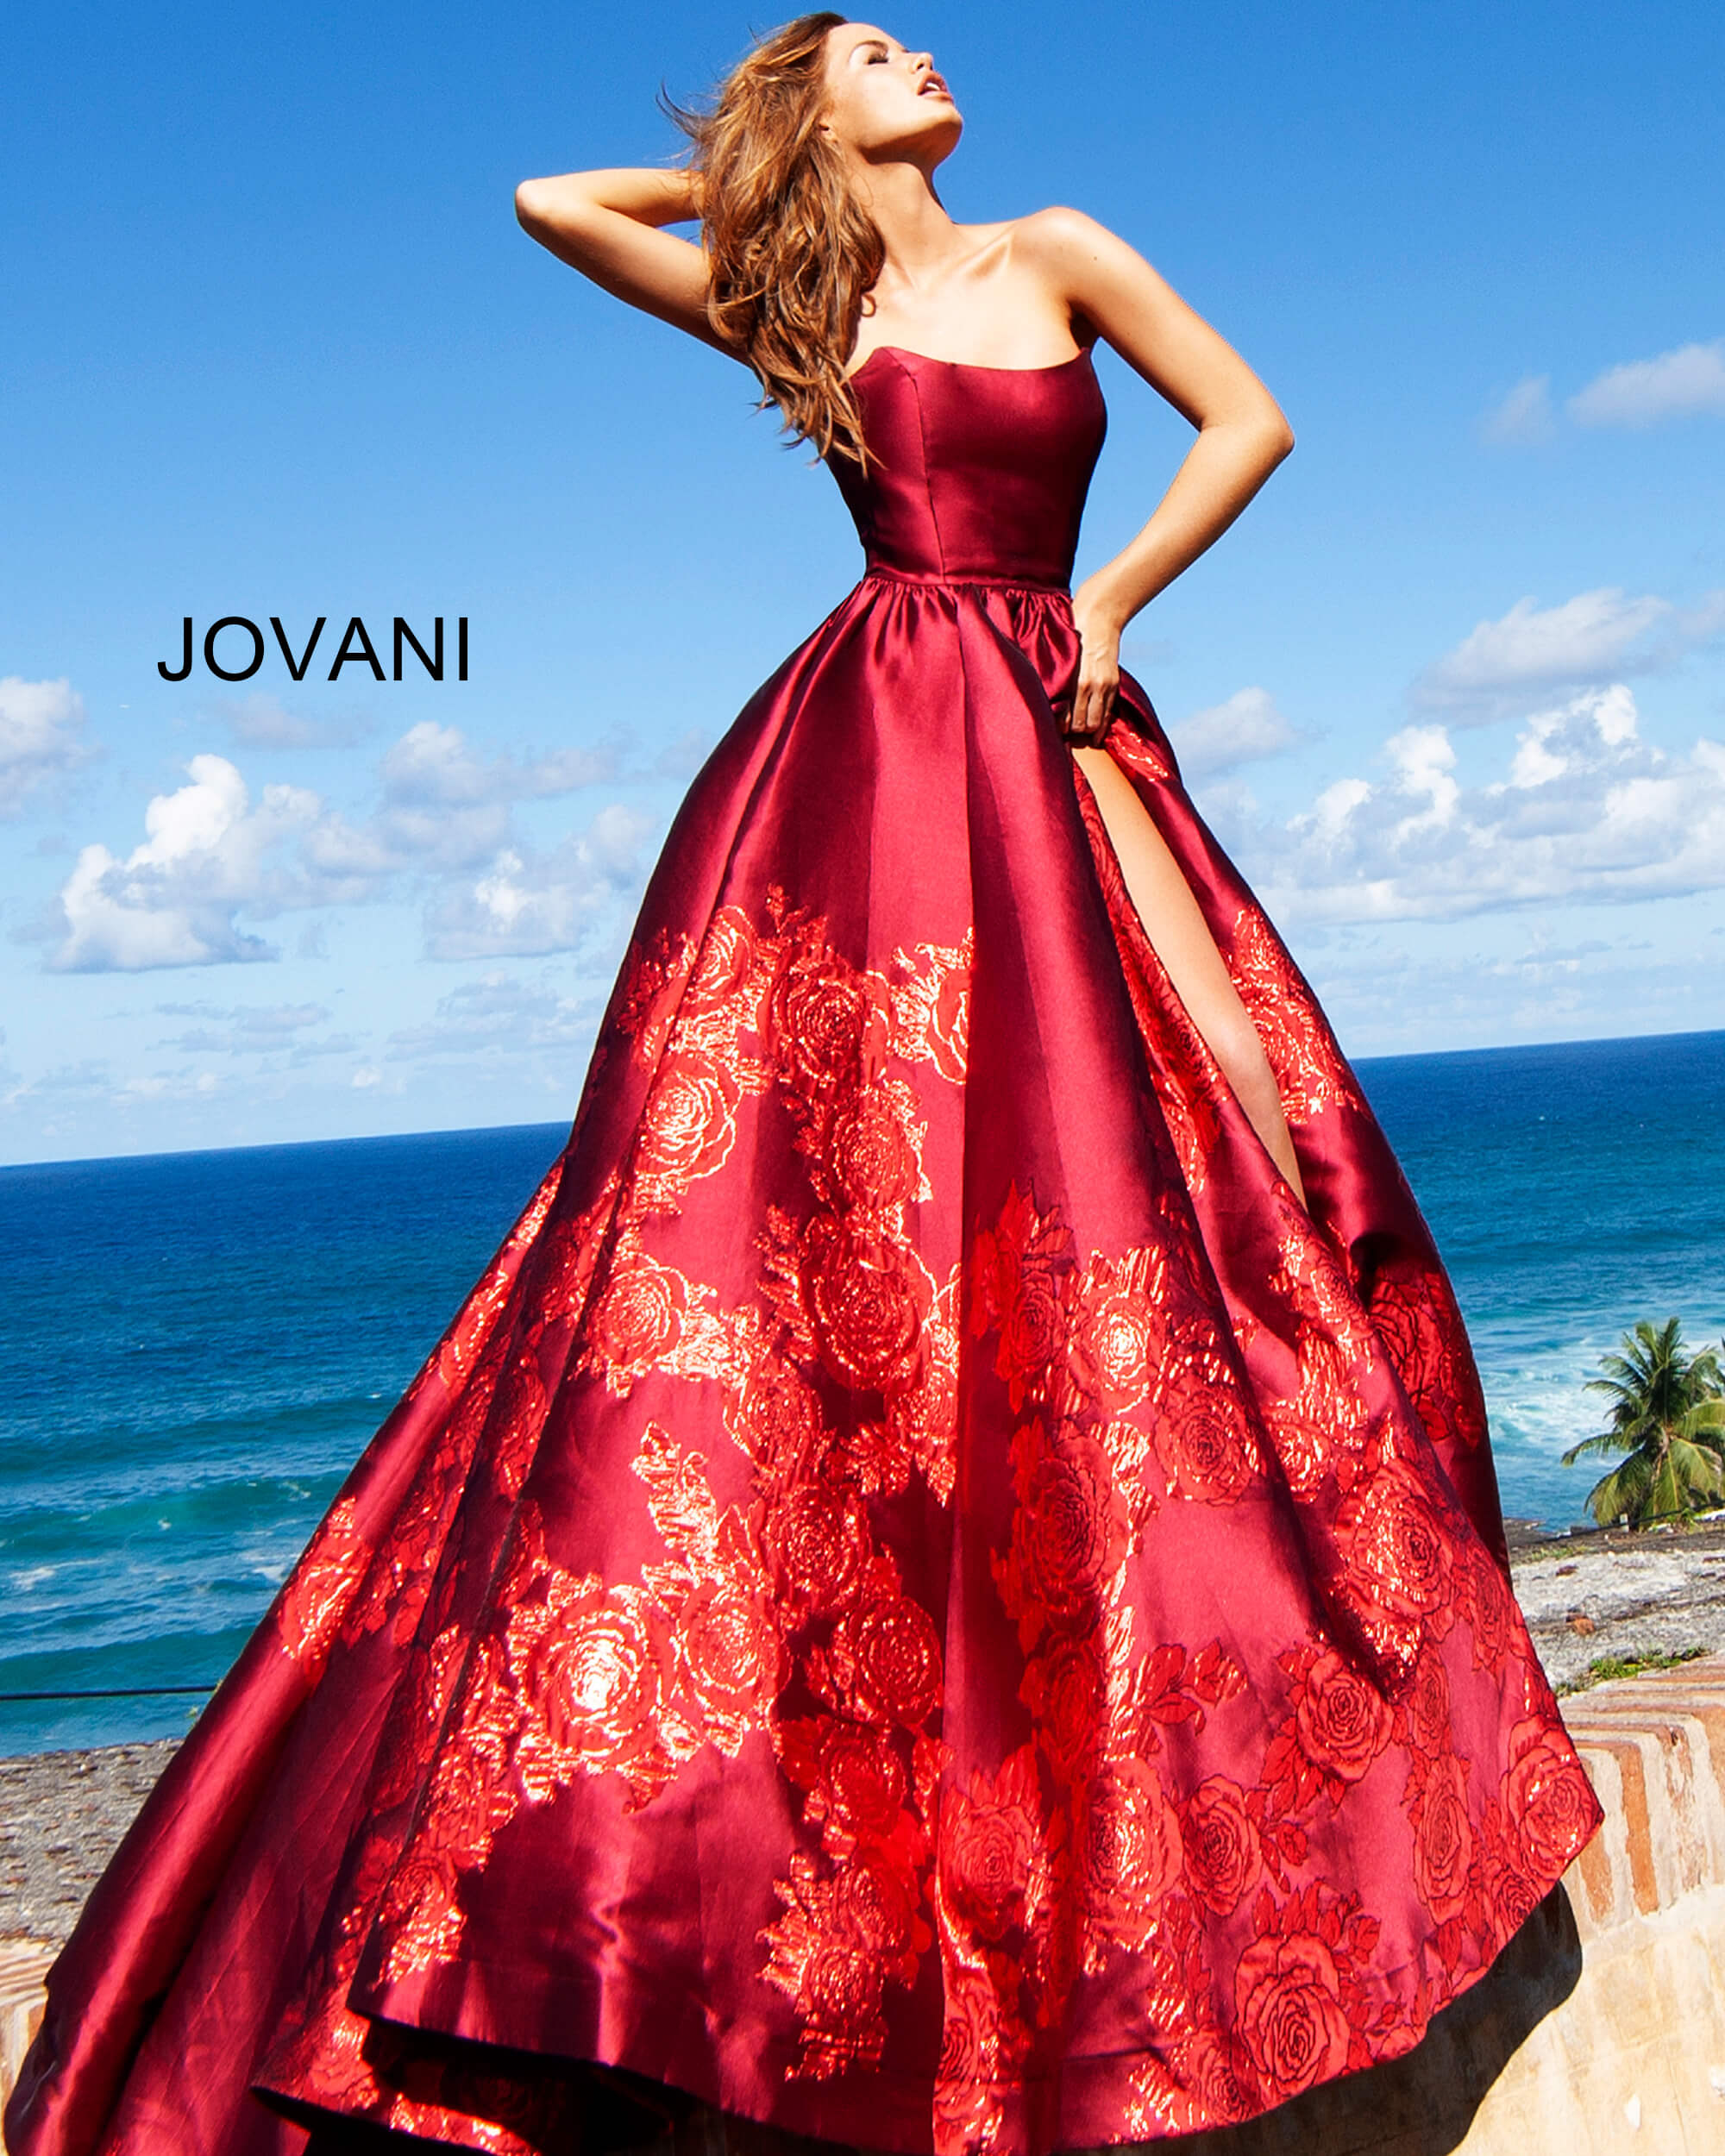 Elegant ball gown with satin bow midpart – Ramialali